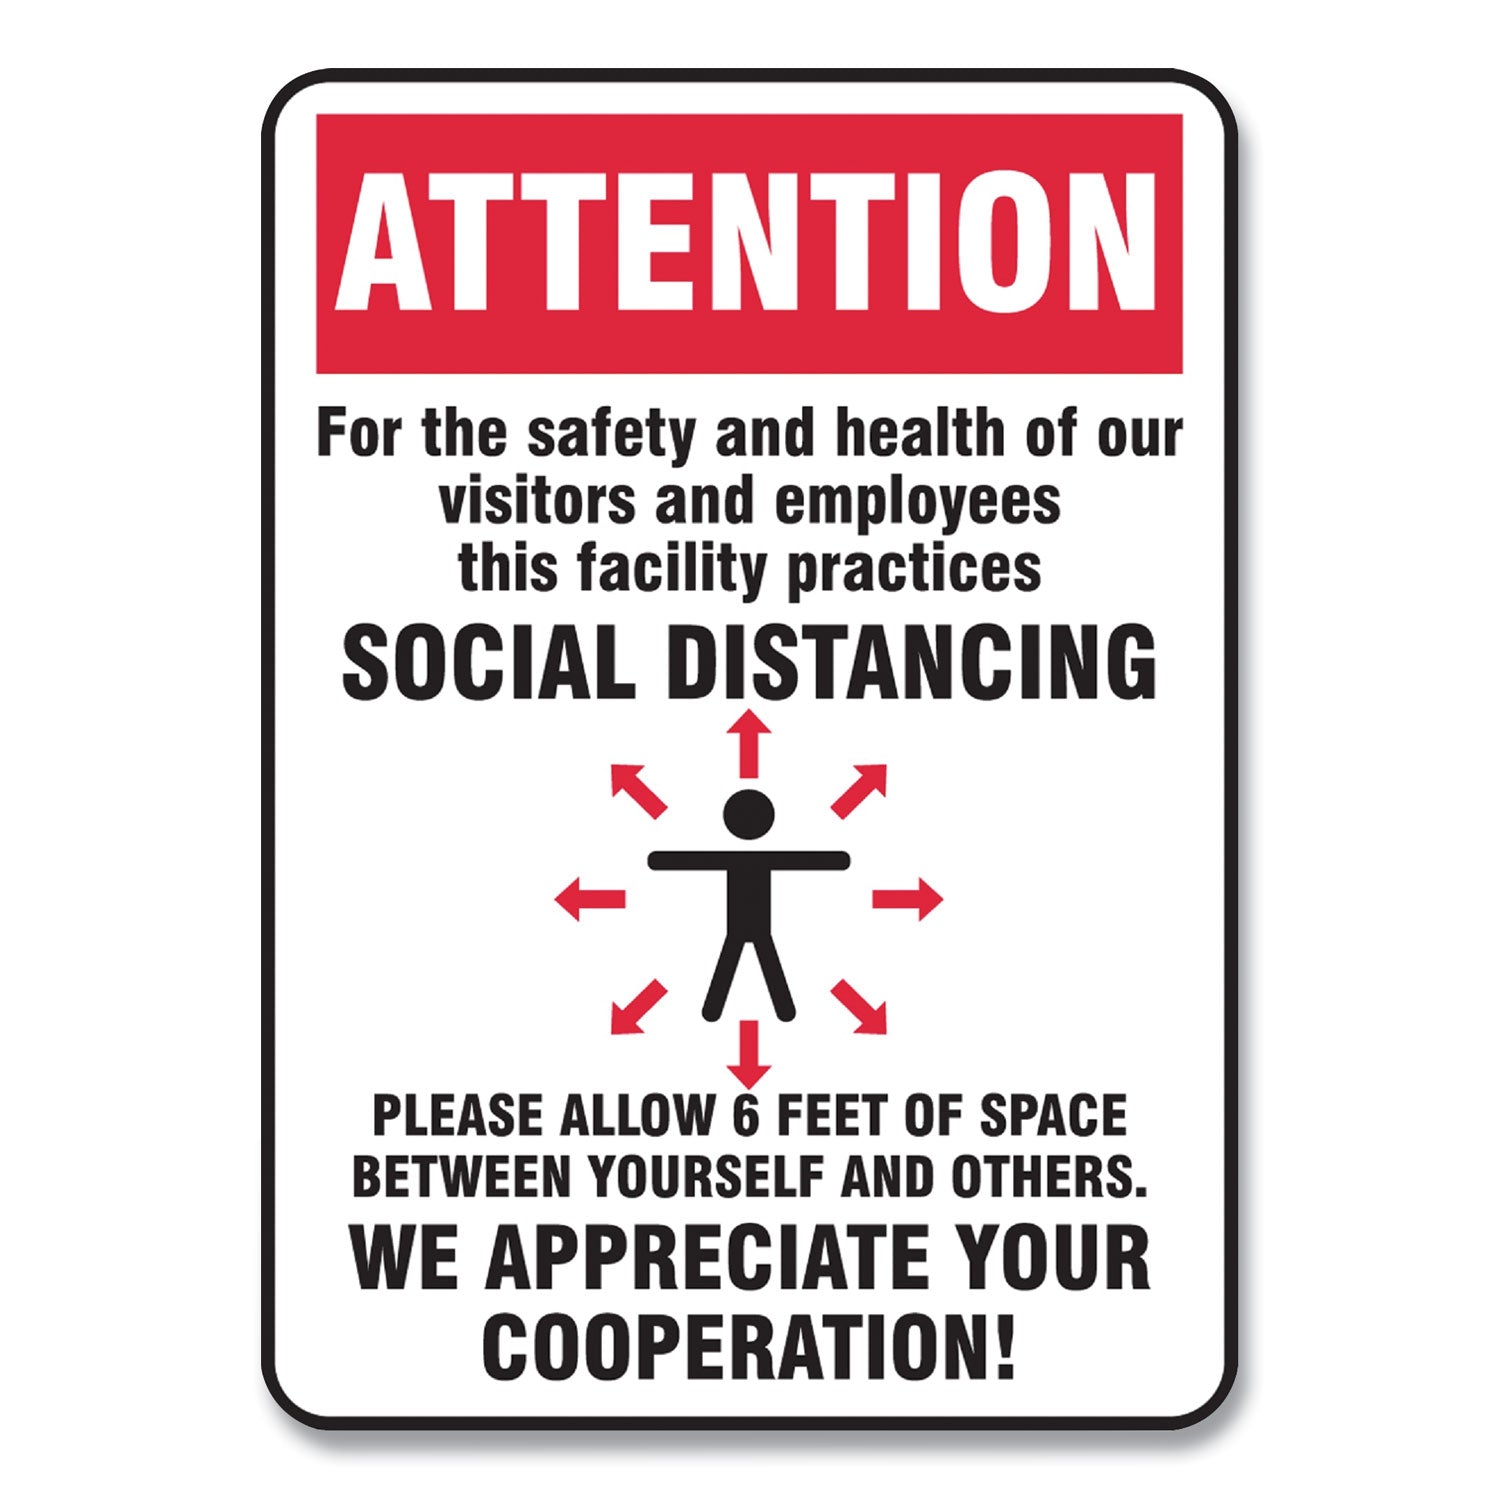 social-distance-signs-wall-7-x-10-visitors-and-employees-distancing-humans-arrows-red-white-10-pack_gn1mgng902vpesp - 1